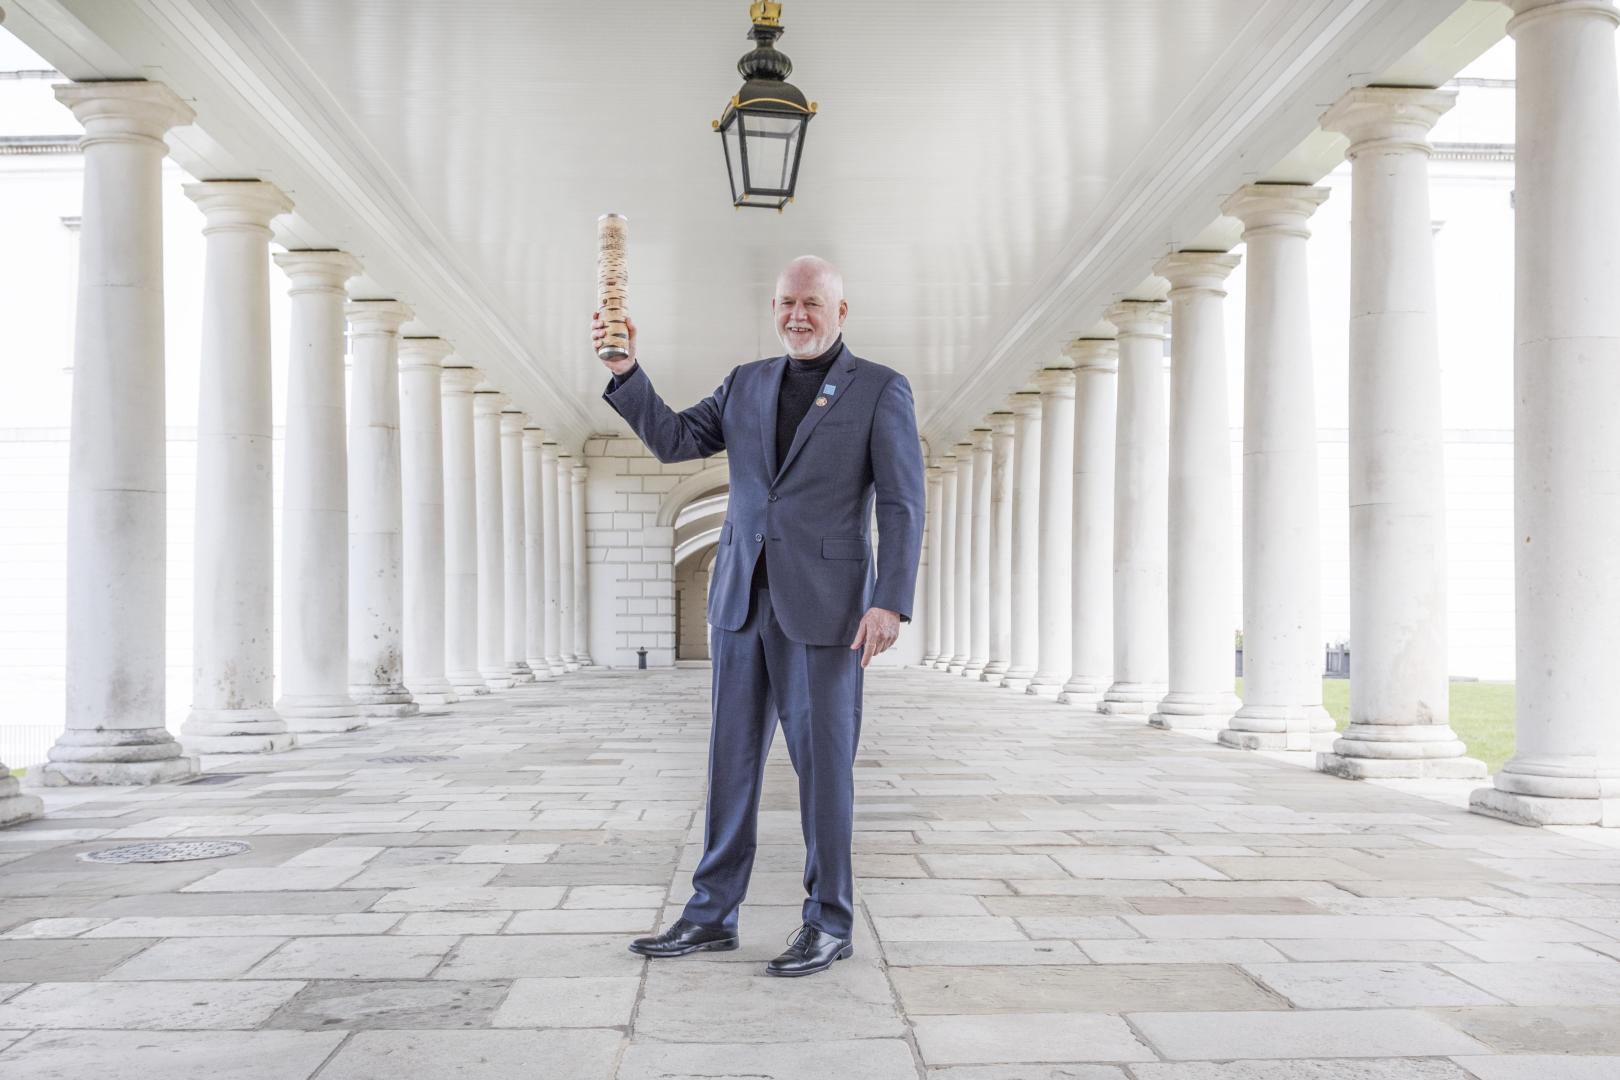 Ambassador Peter Thomson UN Secretary Generals Special Envoy for the Ocean holds aloft the Relay4Nature baton after receiving it at the National Maritime Museum in Greenwich London.